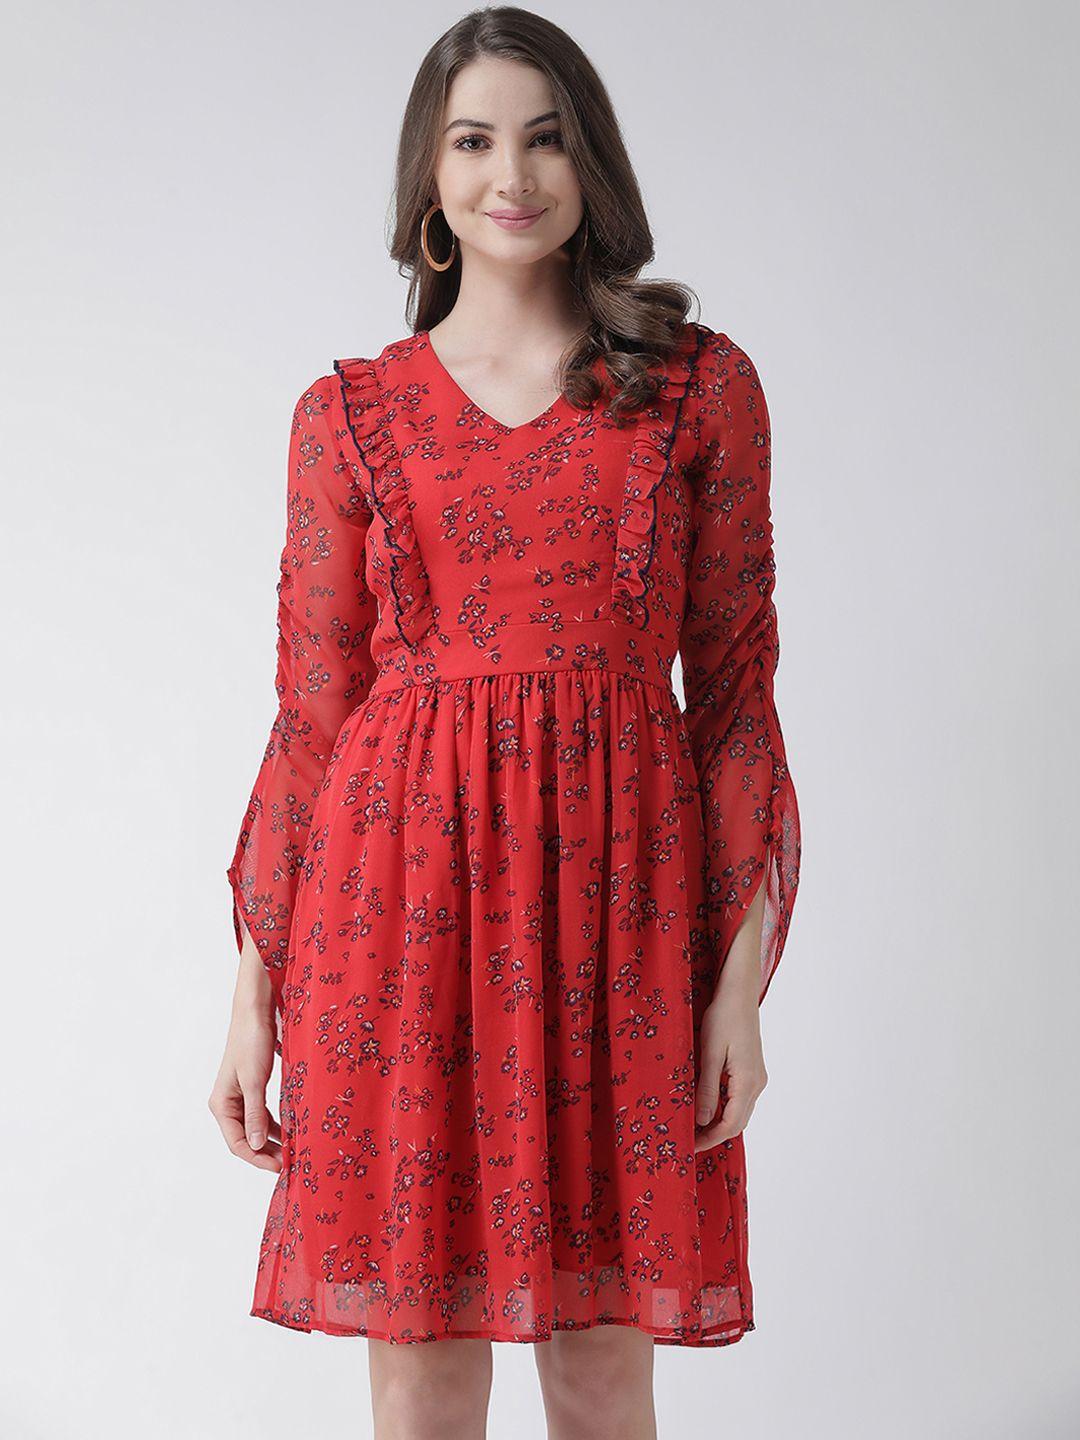 kassually women red printed fit and flare dress